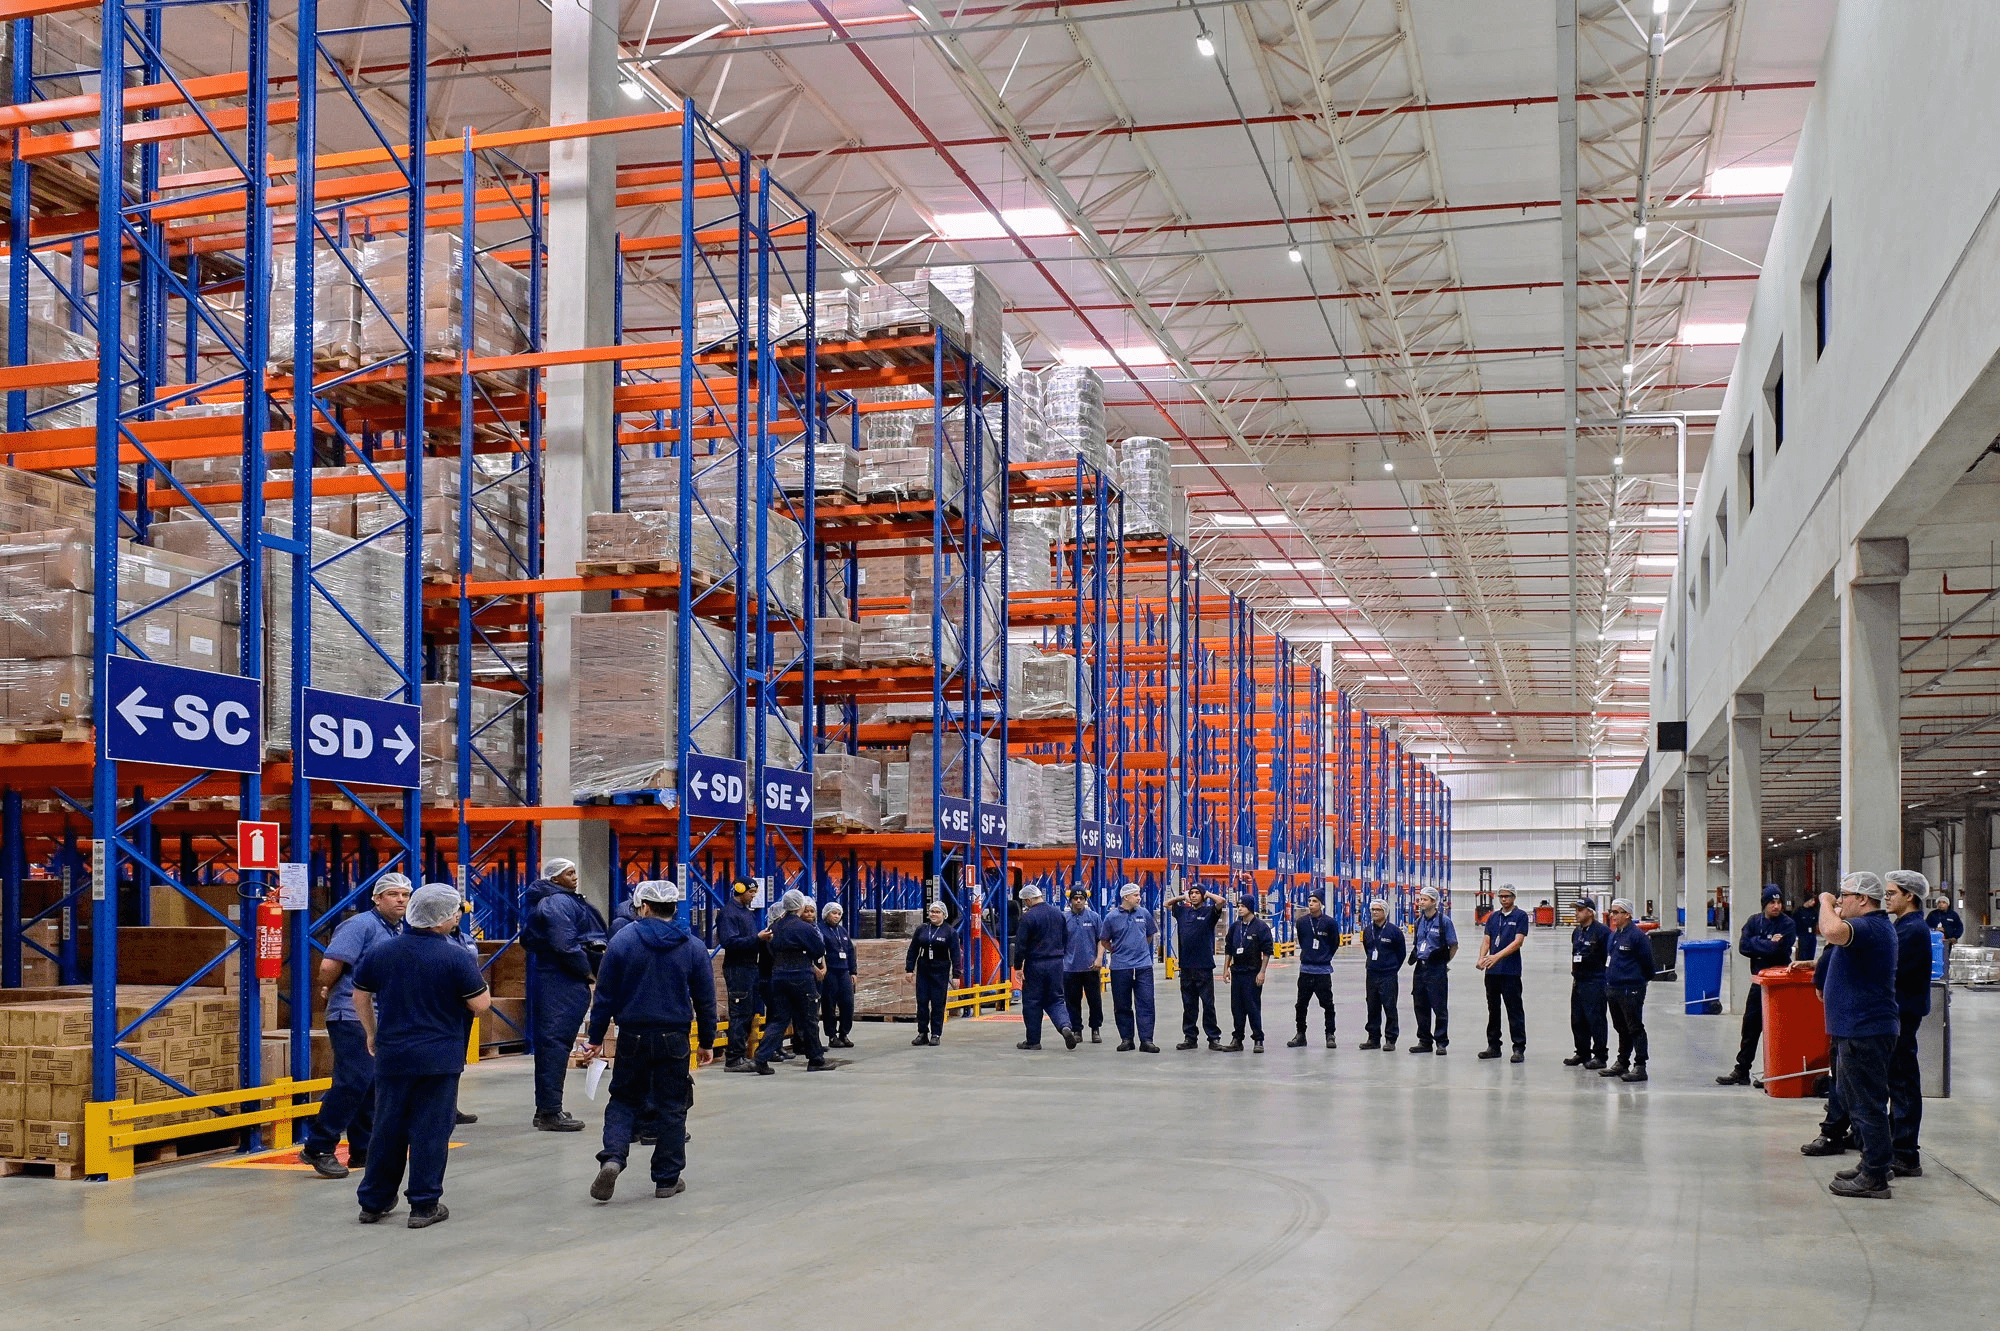 A group of warehouse workers in signature blue shirts gathered inside a massive warehouse for a roll call